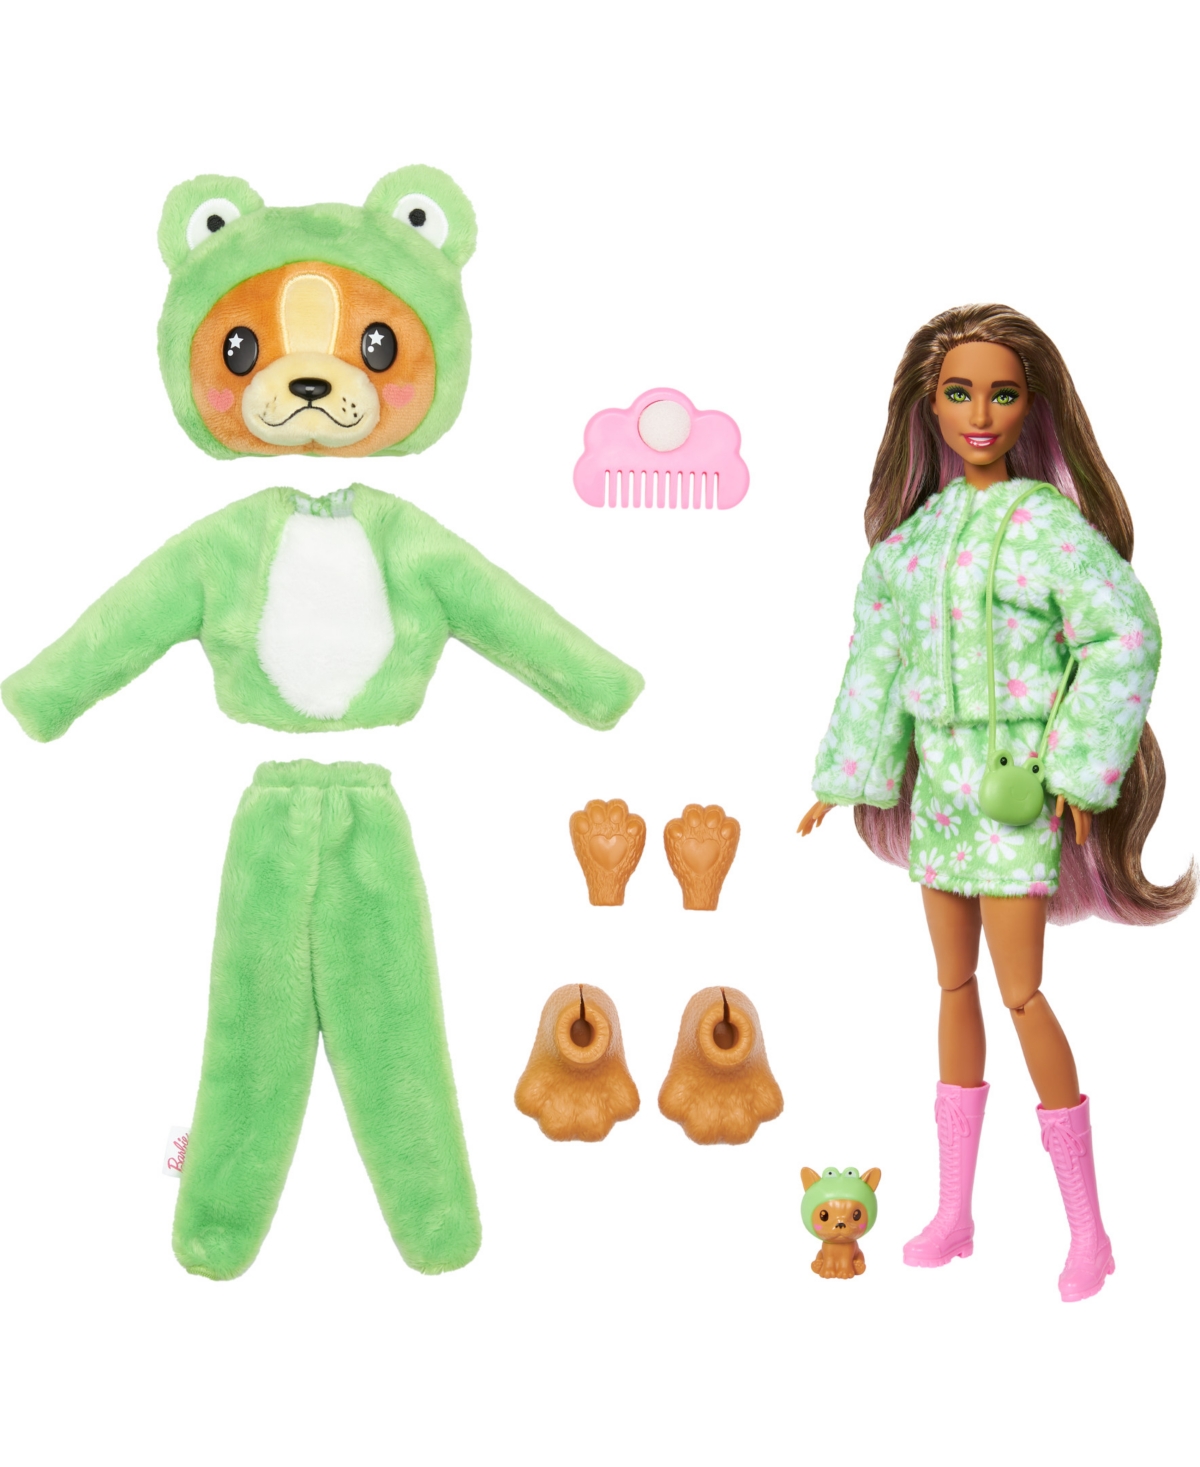 Shop Barbie Cutie Reveal Costume-themed Series Doll And Accessories With 10 Surprises, Puppy As Frog In Multi